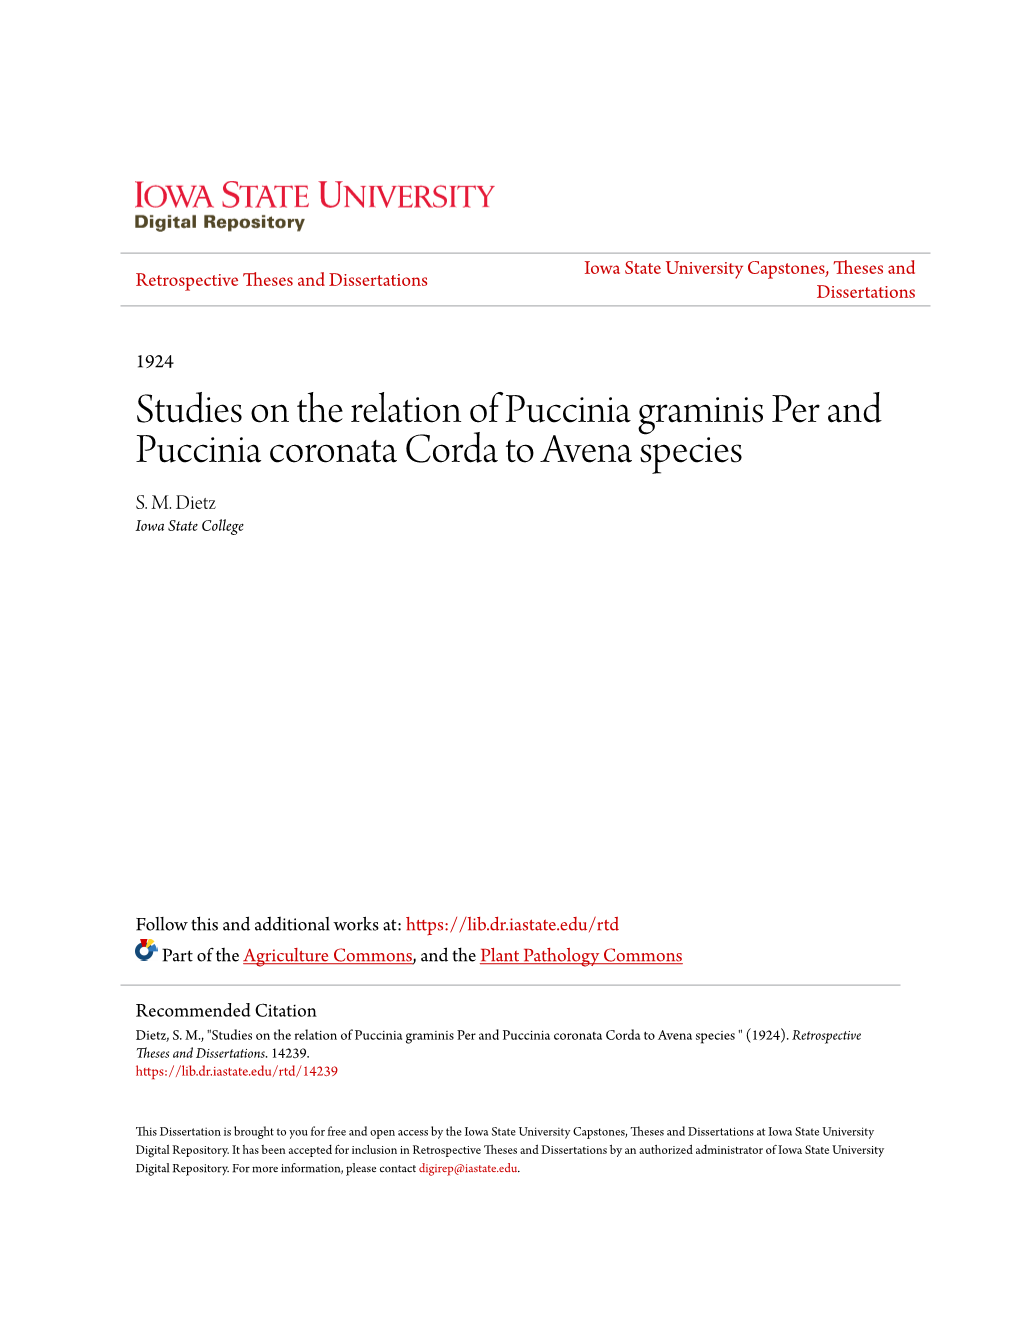 Studies on the Relation of Puccinia Graminis Per and Puccinia Coronata Corda to Avena Species S